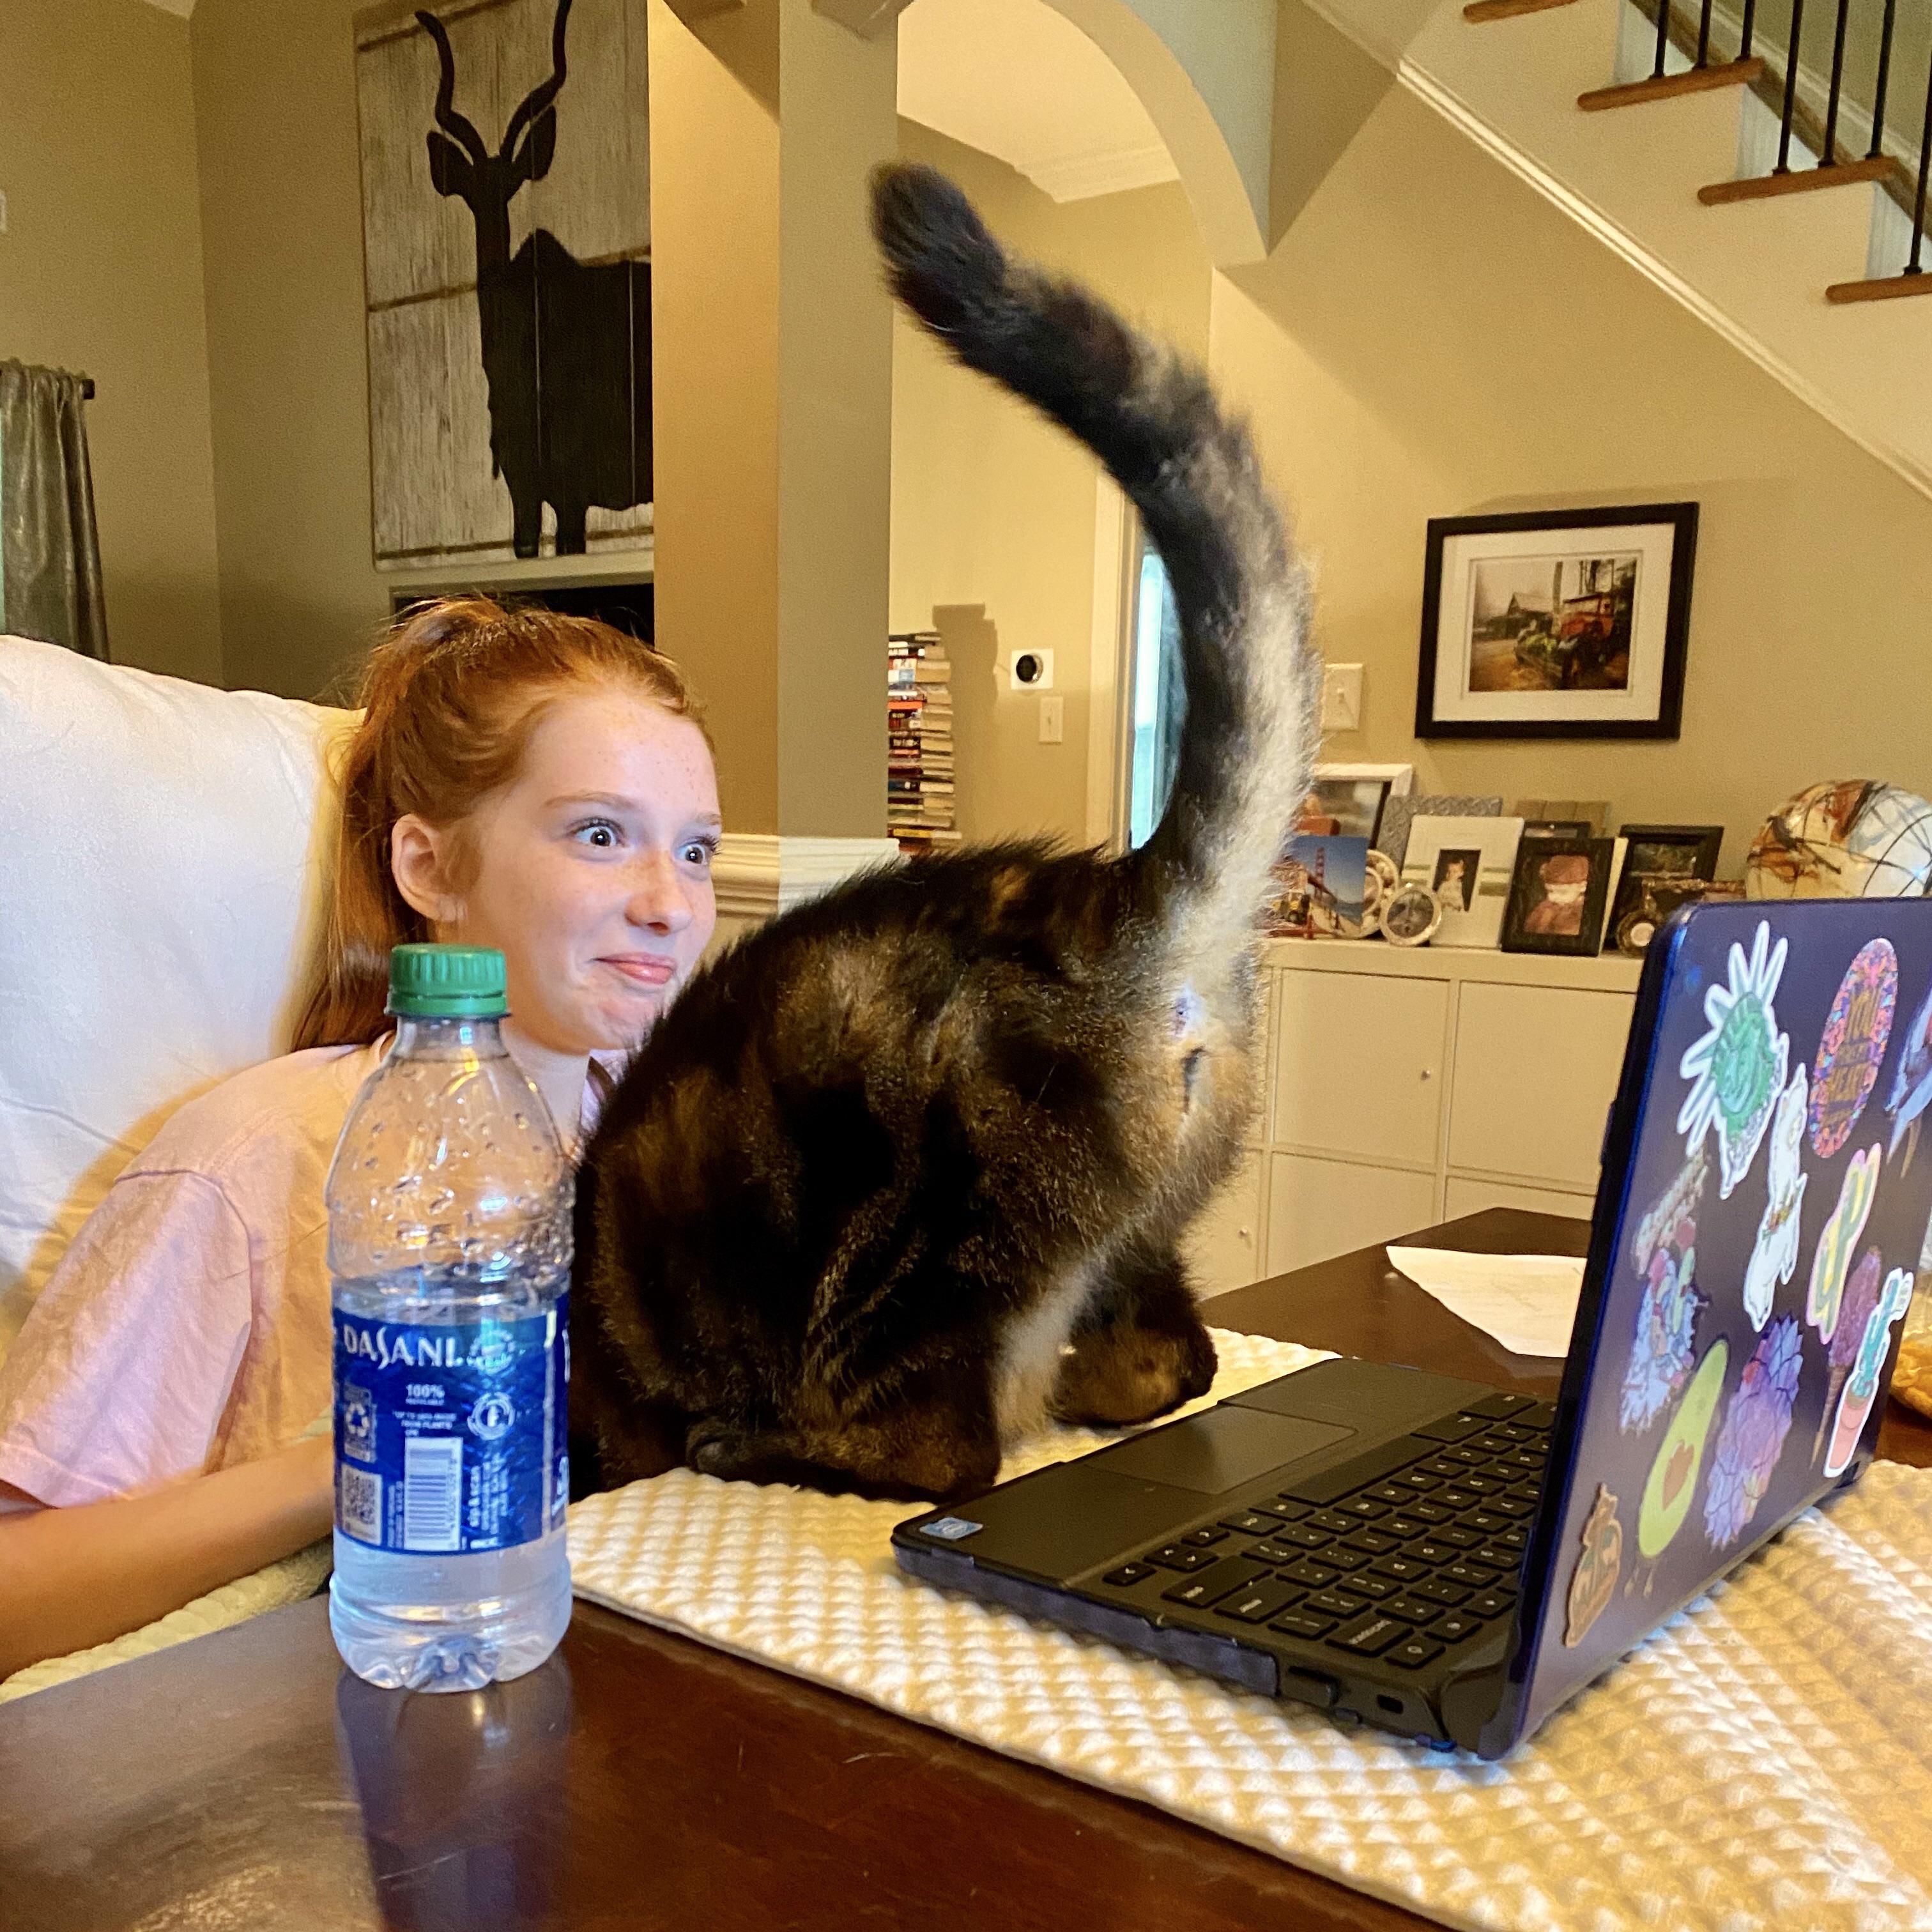 The cat loves to show her @ during the daughter’s virtual clASSes.